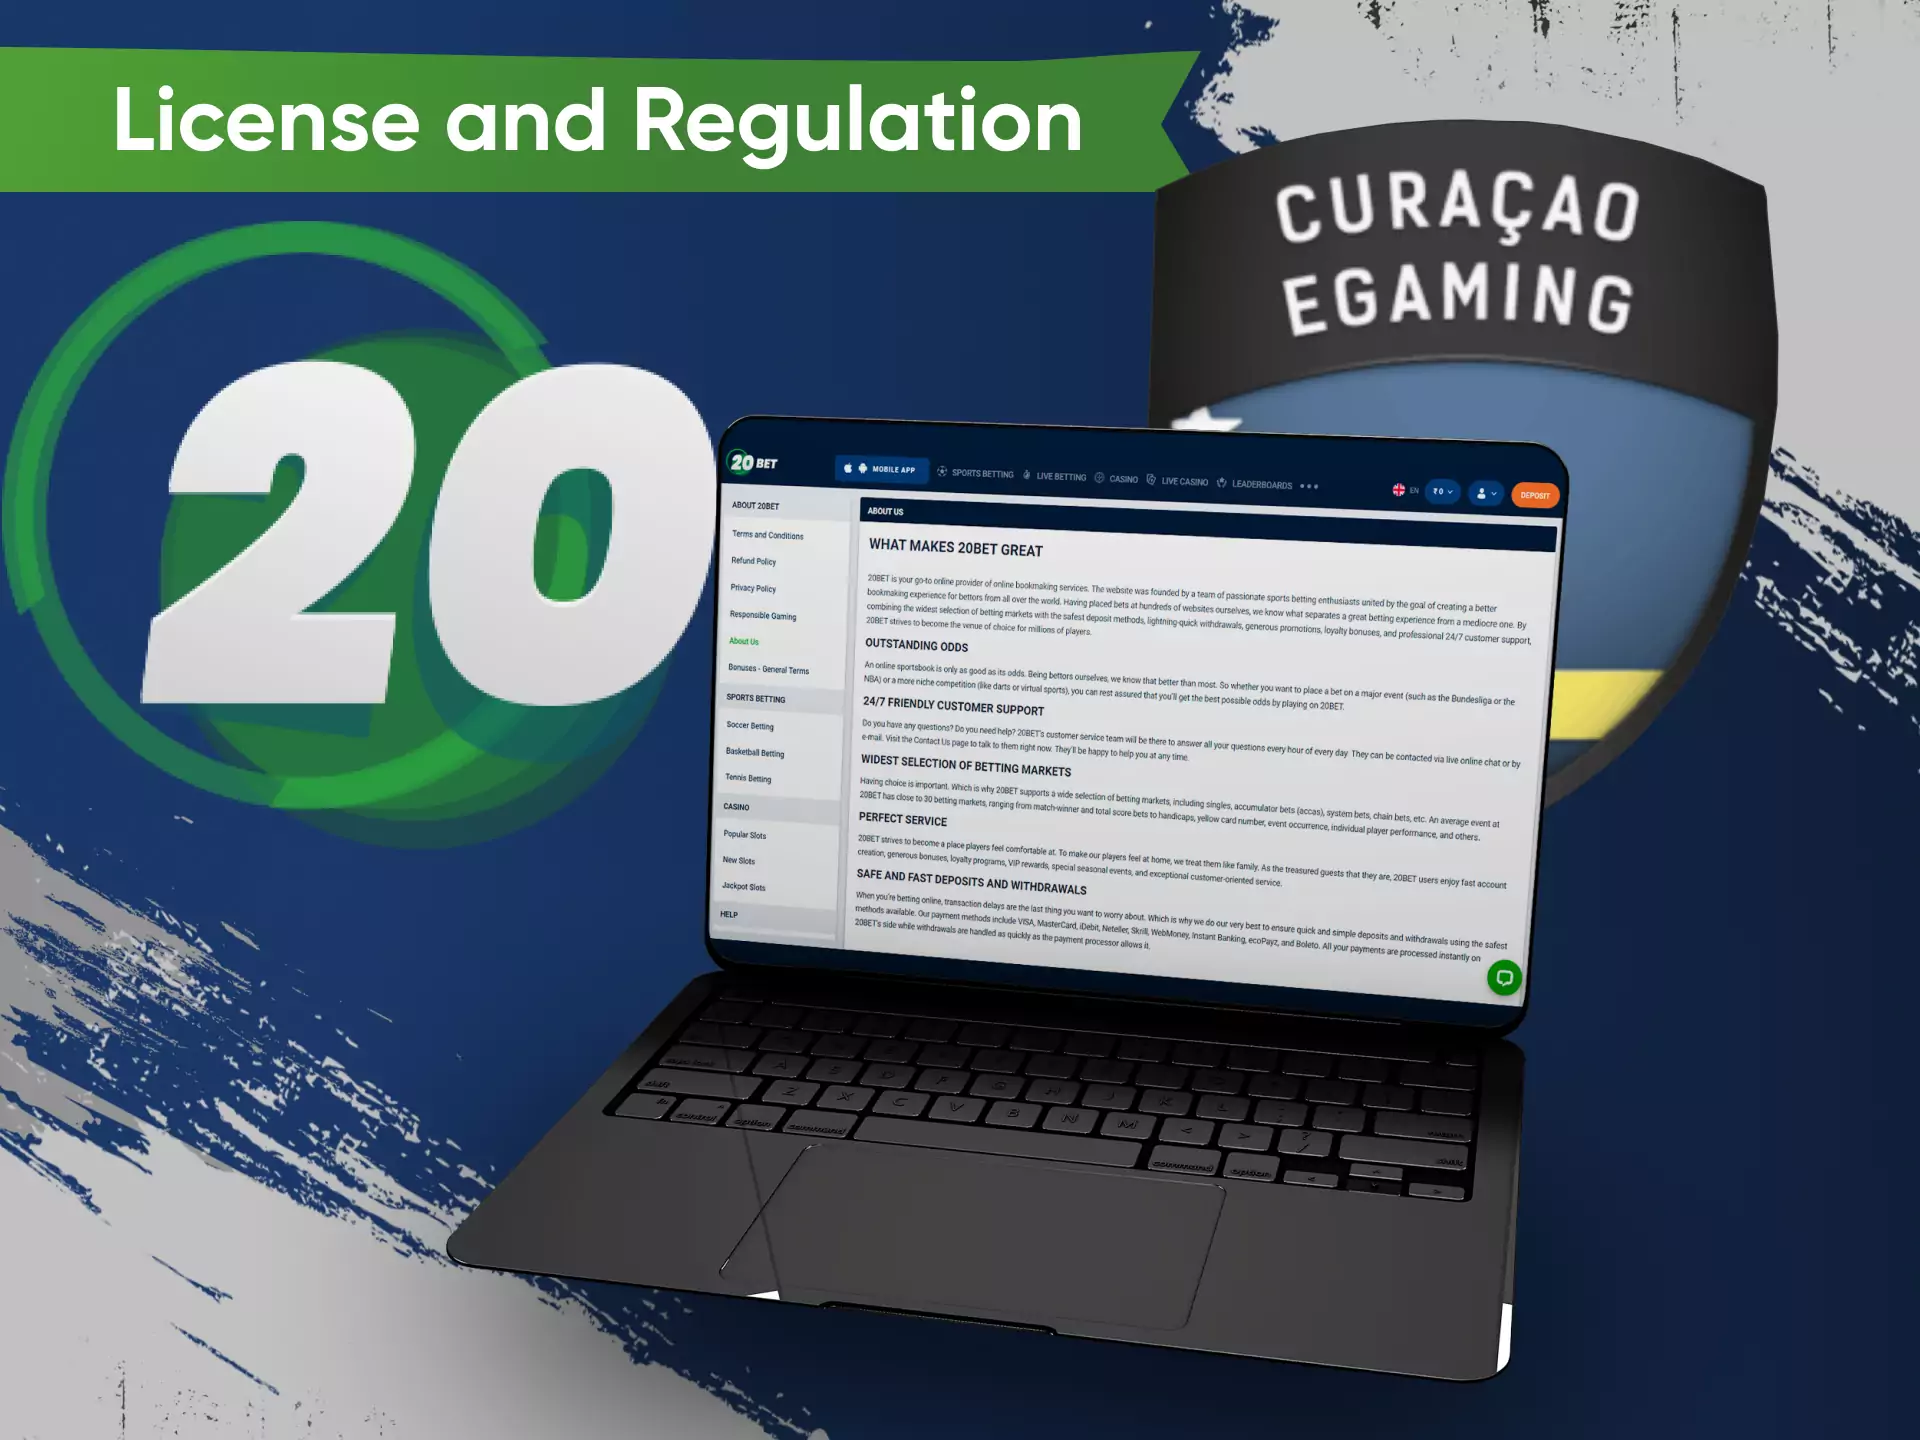 20bet provides online betting and casino games thanks to the Curacao Egaming license.